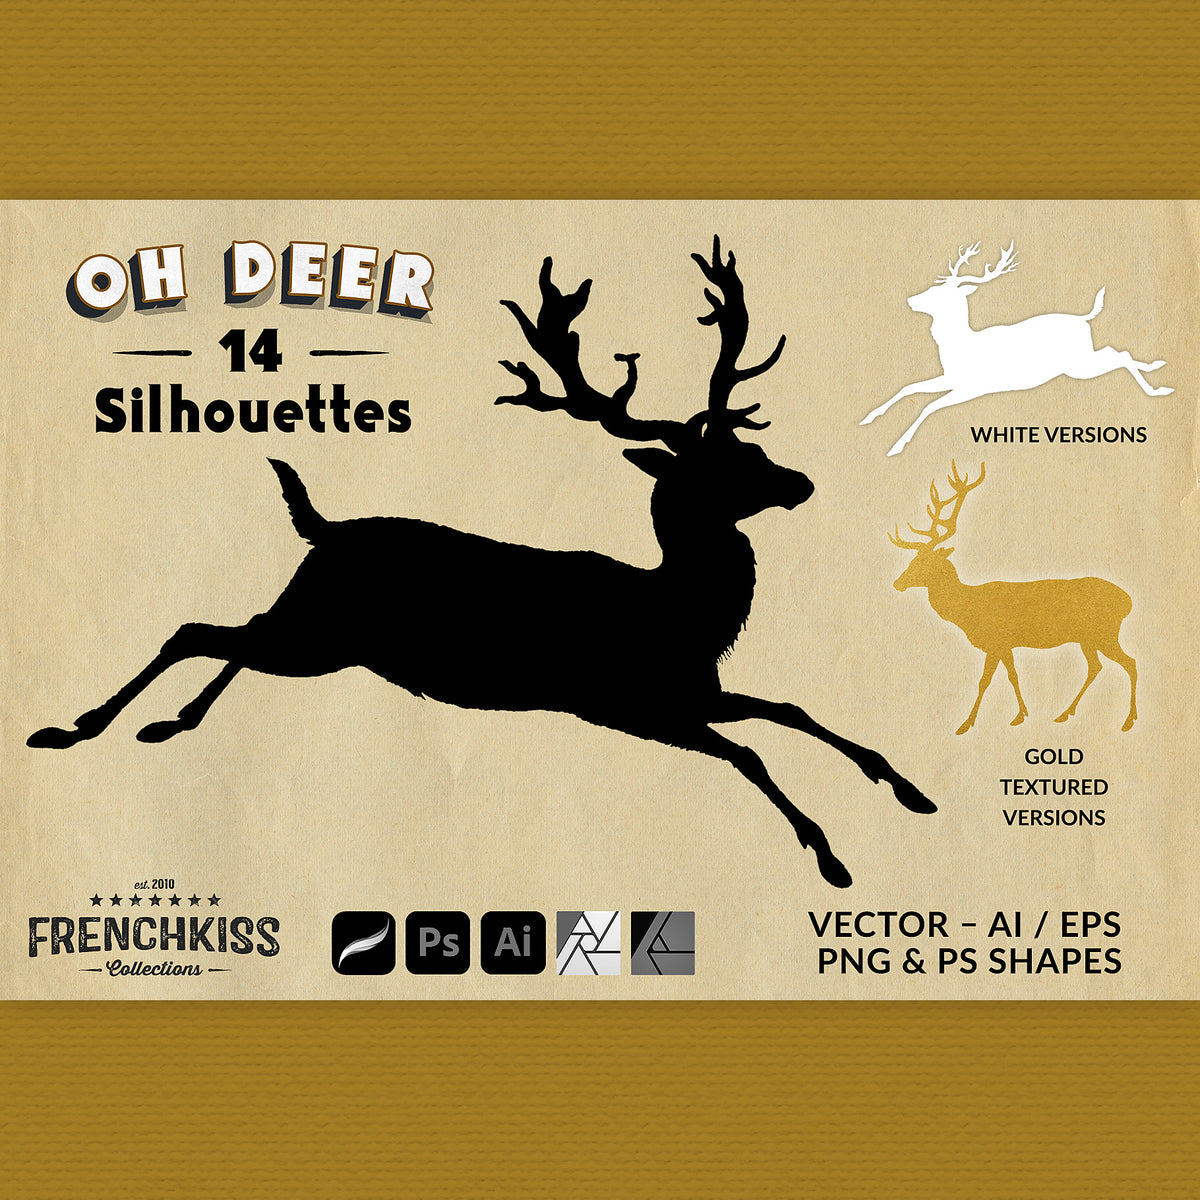 Vintage deer illustrations silhouette graphics. Vector, PNG, and PS Shapes.